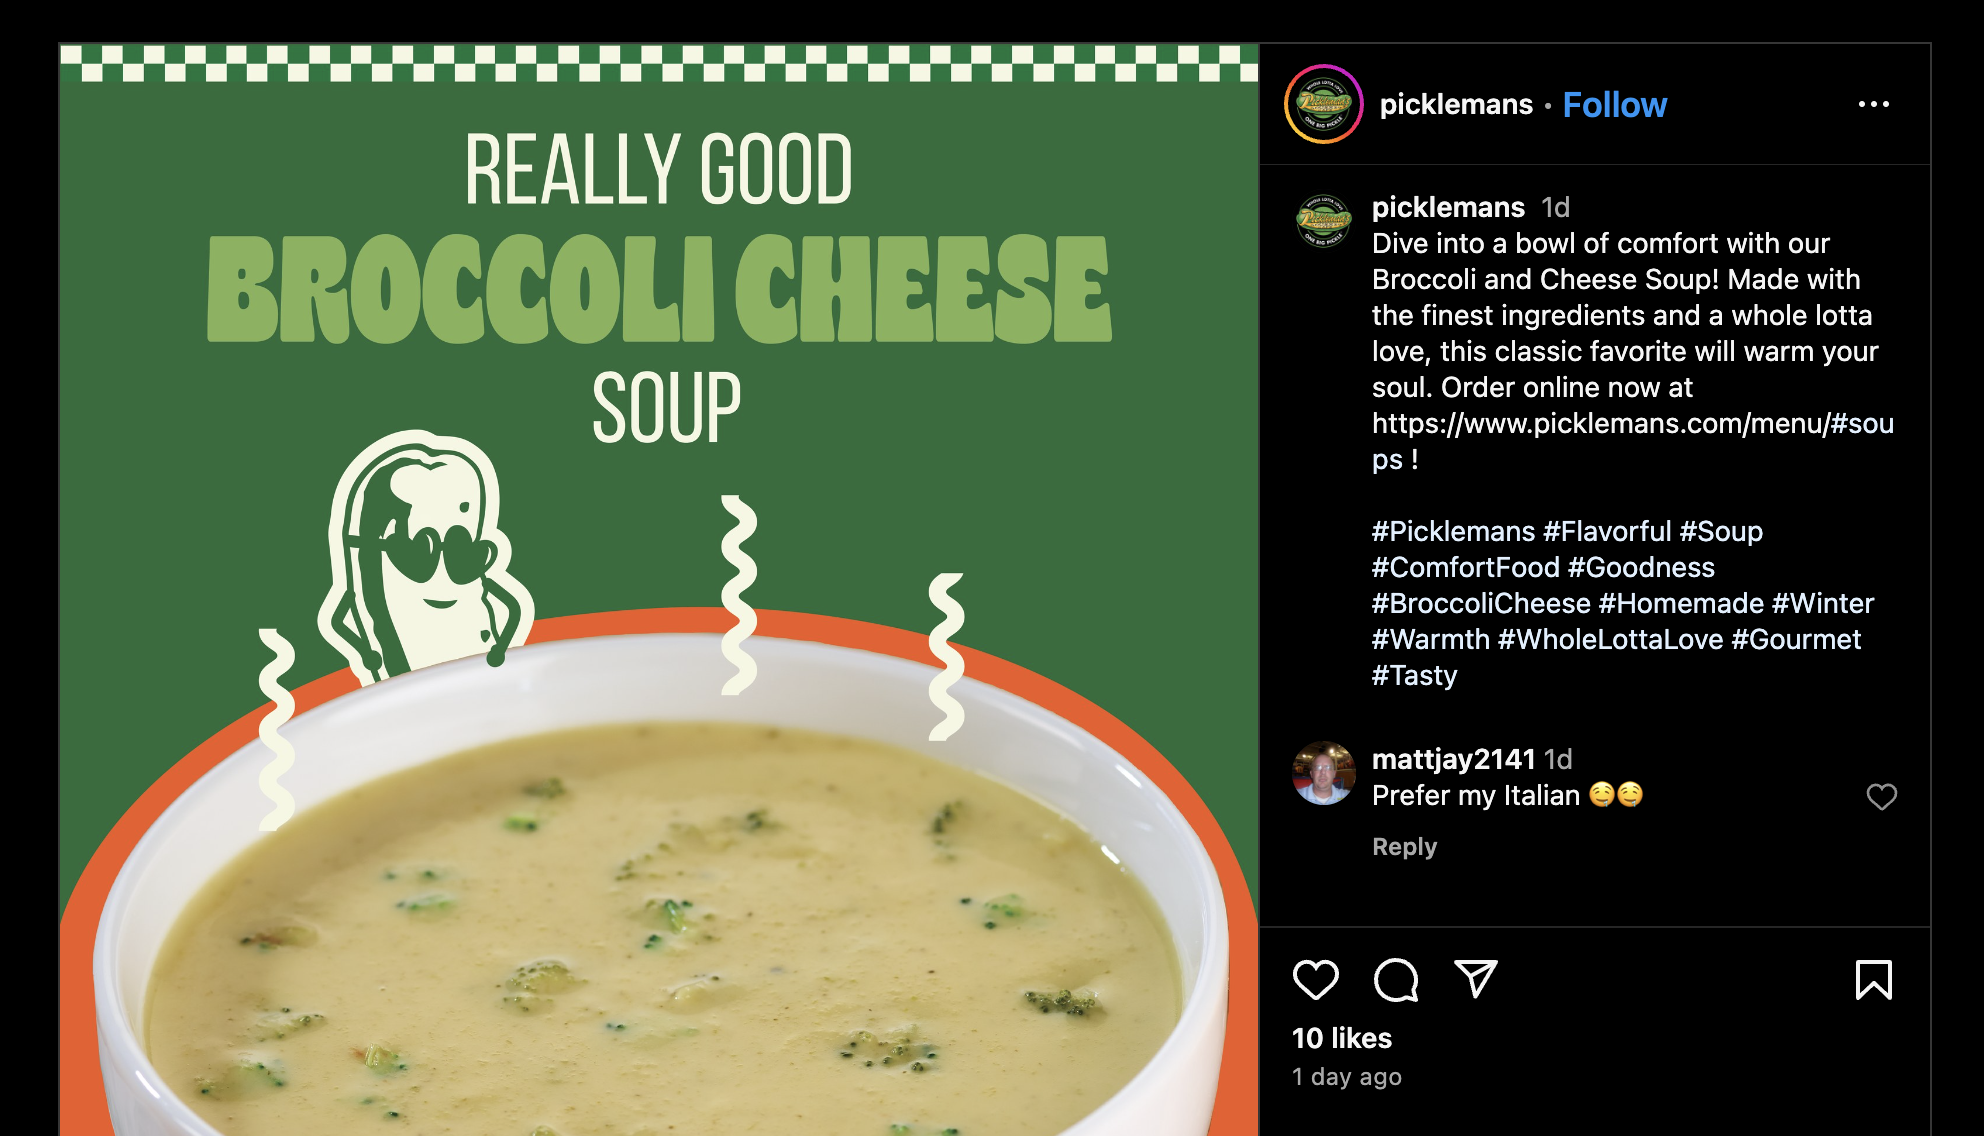 Instagram screenshot of broccoli cheese soup from Pickleman's Gourmet Cafe in St. Louis, MO